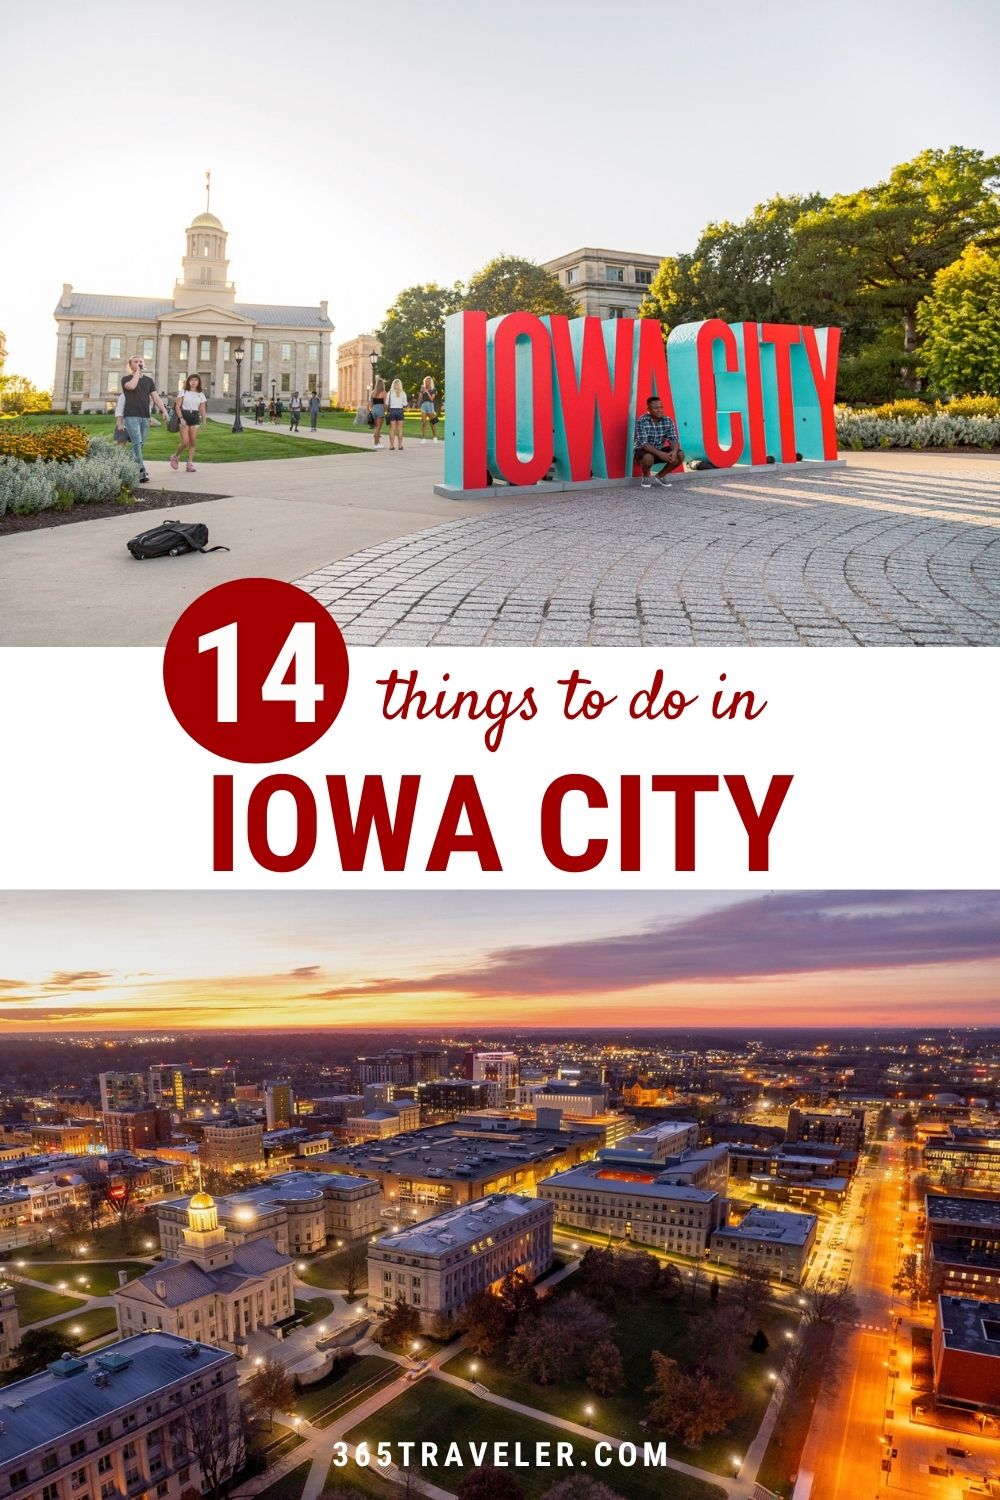 14 REALLY SPECTACULAR THINGS TO DO IN IOWA CITY